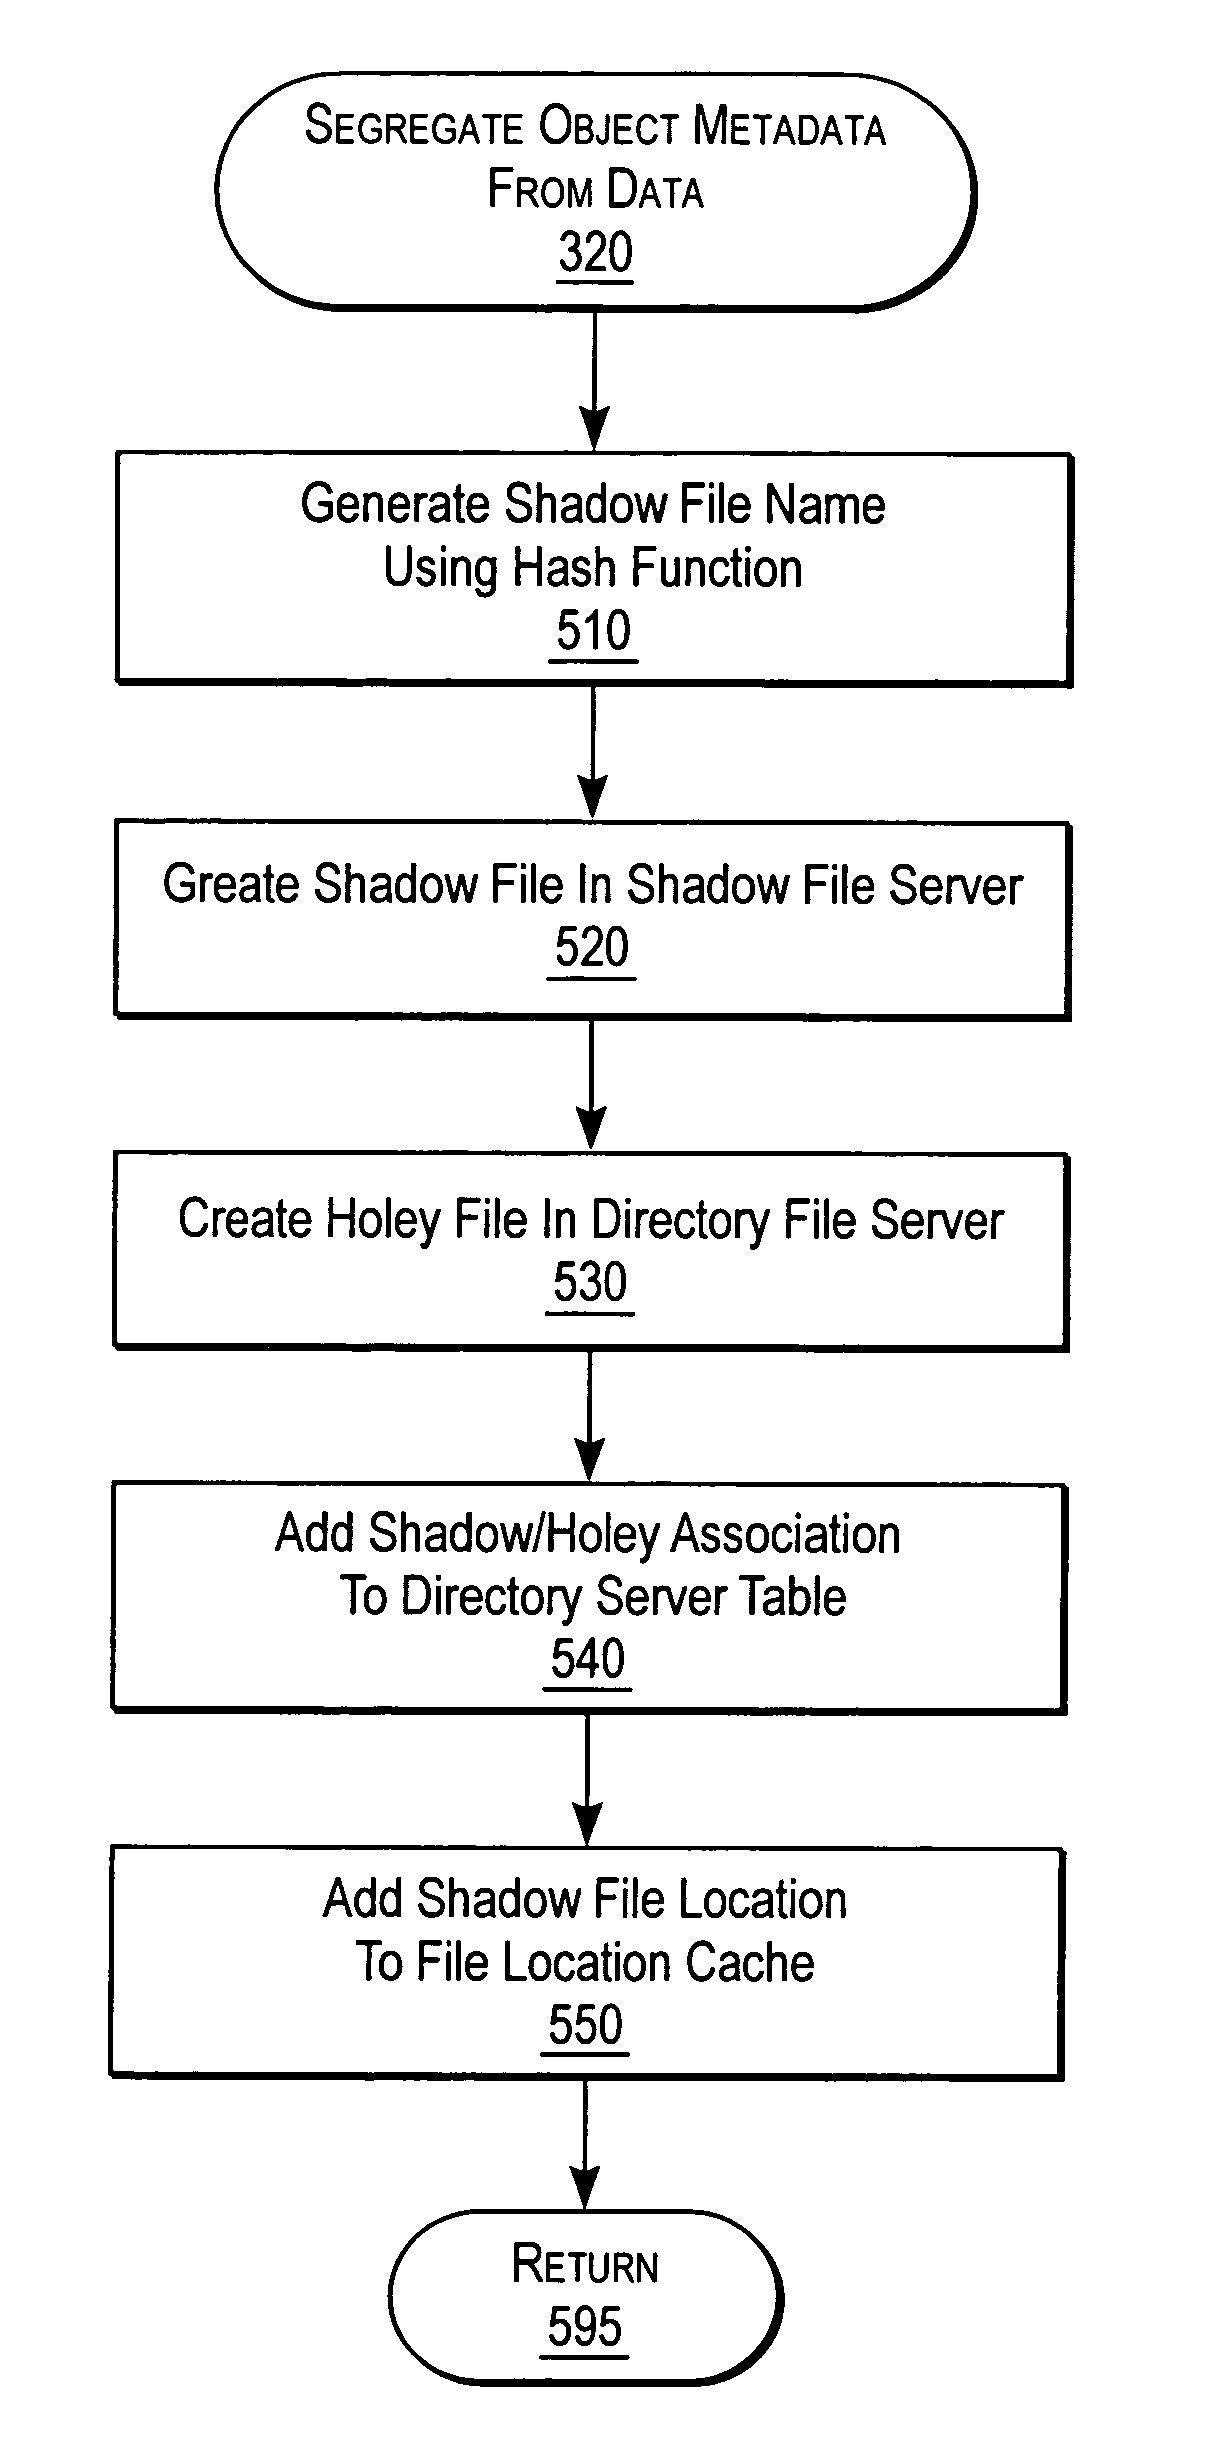 Extended storage capacity for a network file server